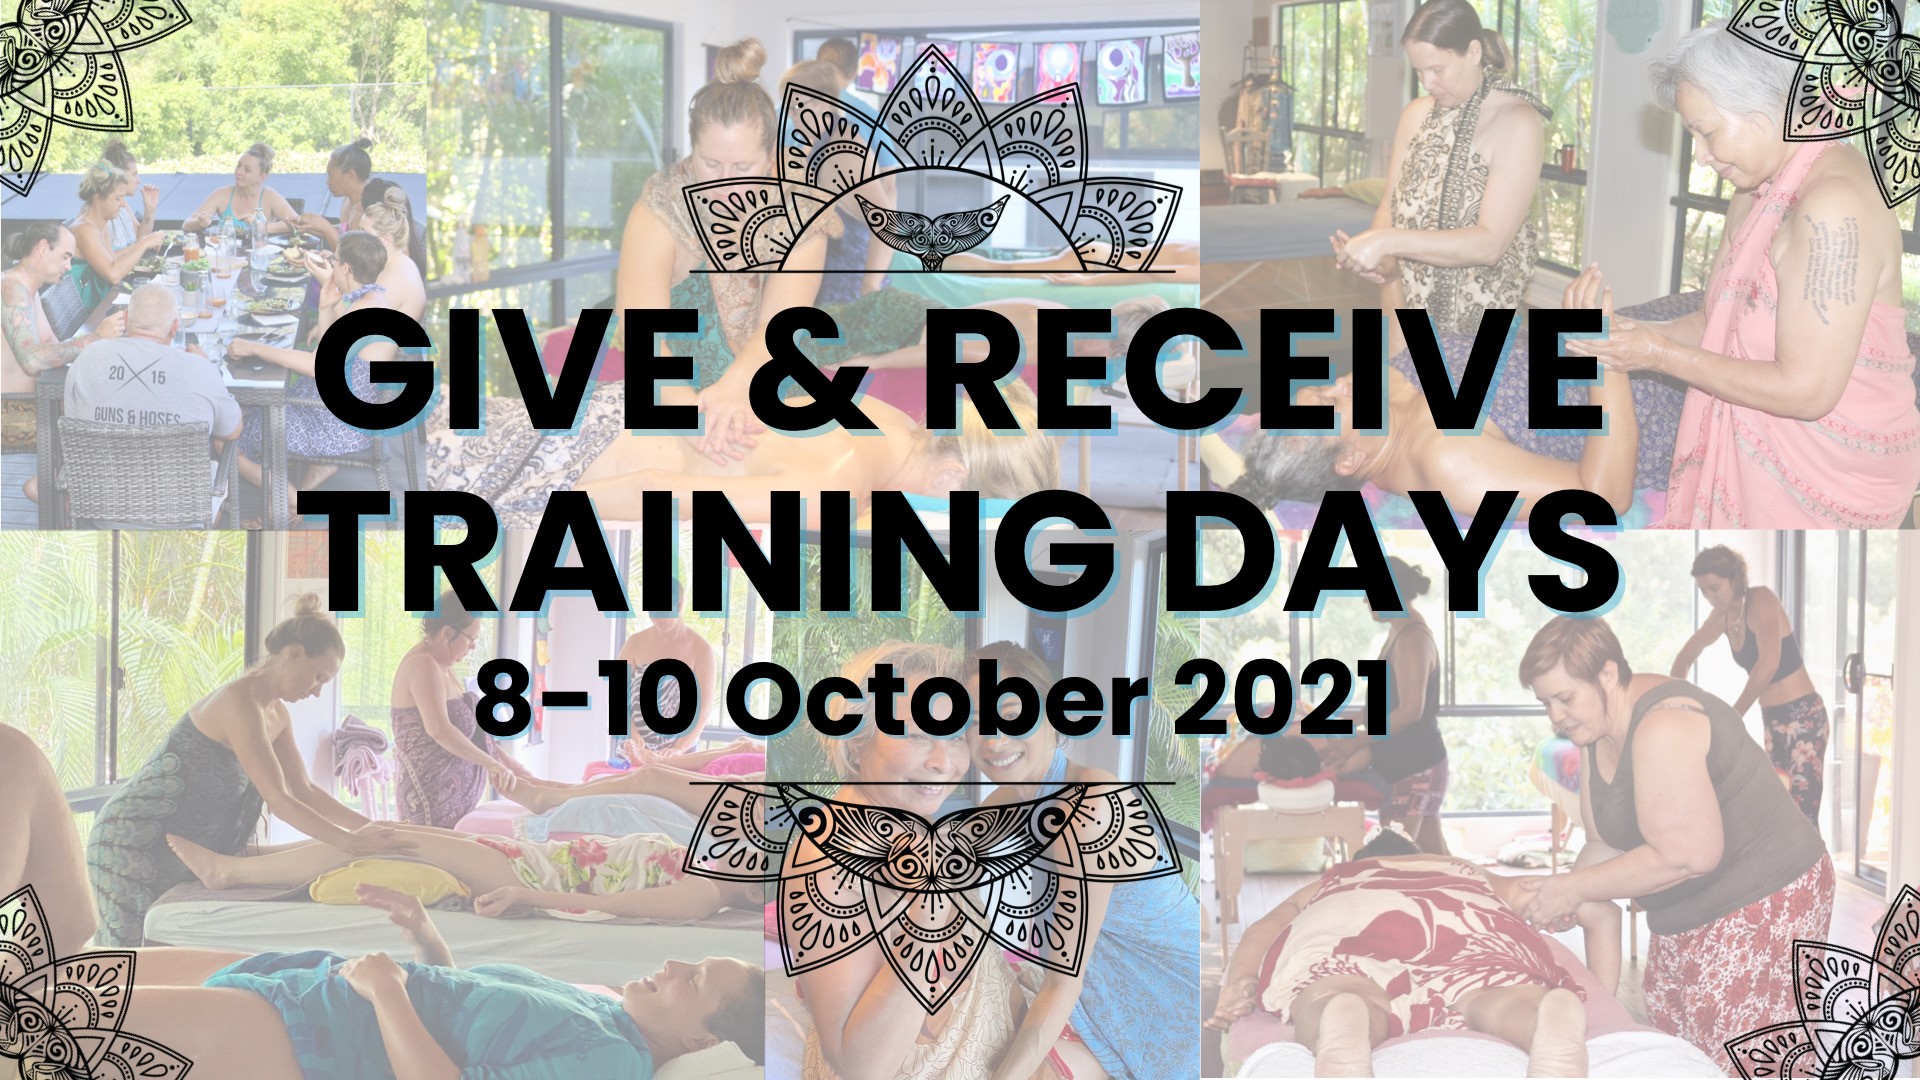 Give & Receive Training Days are here!